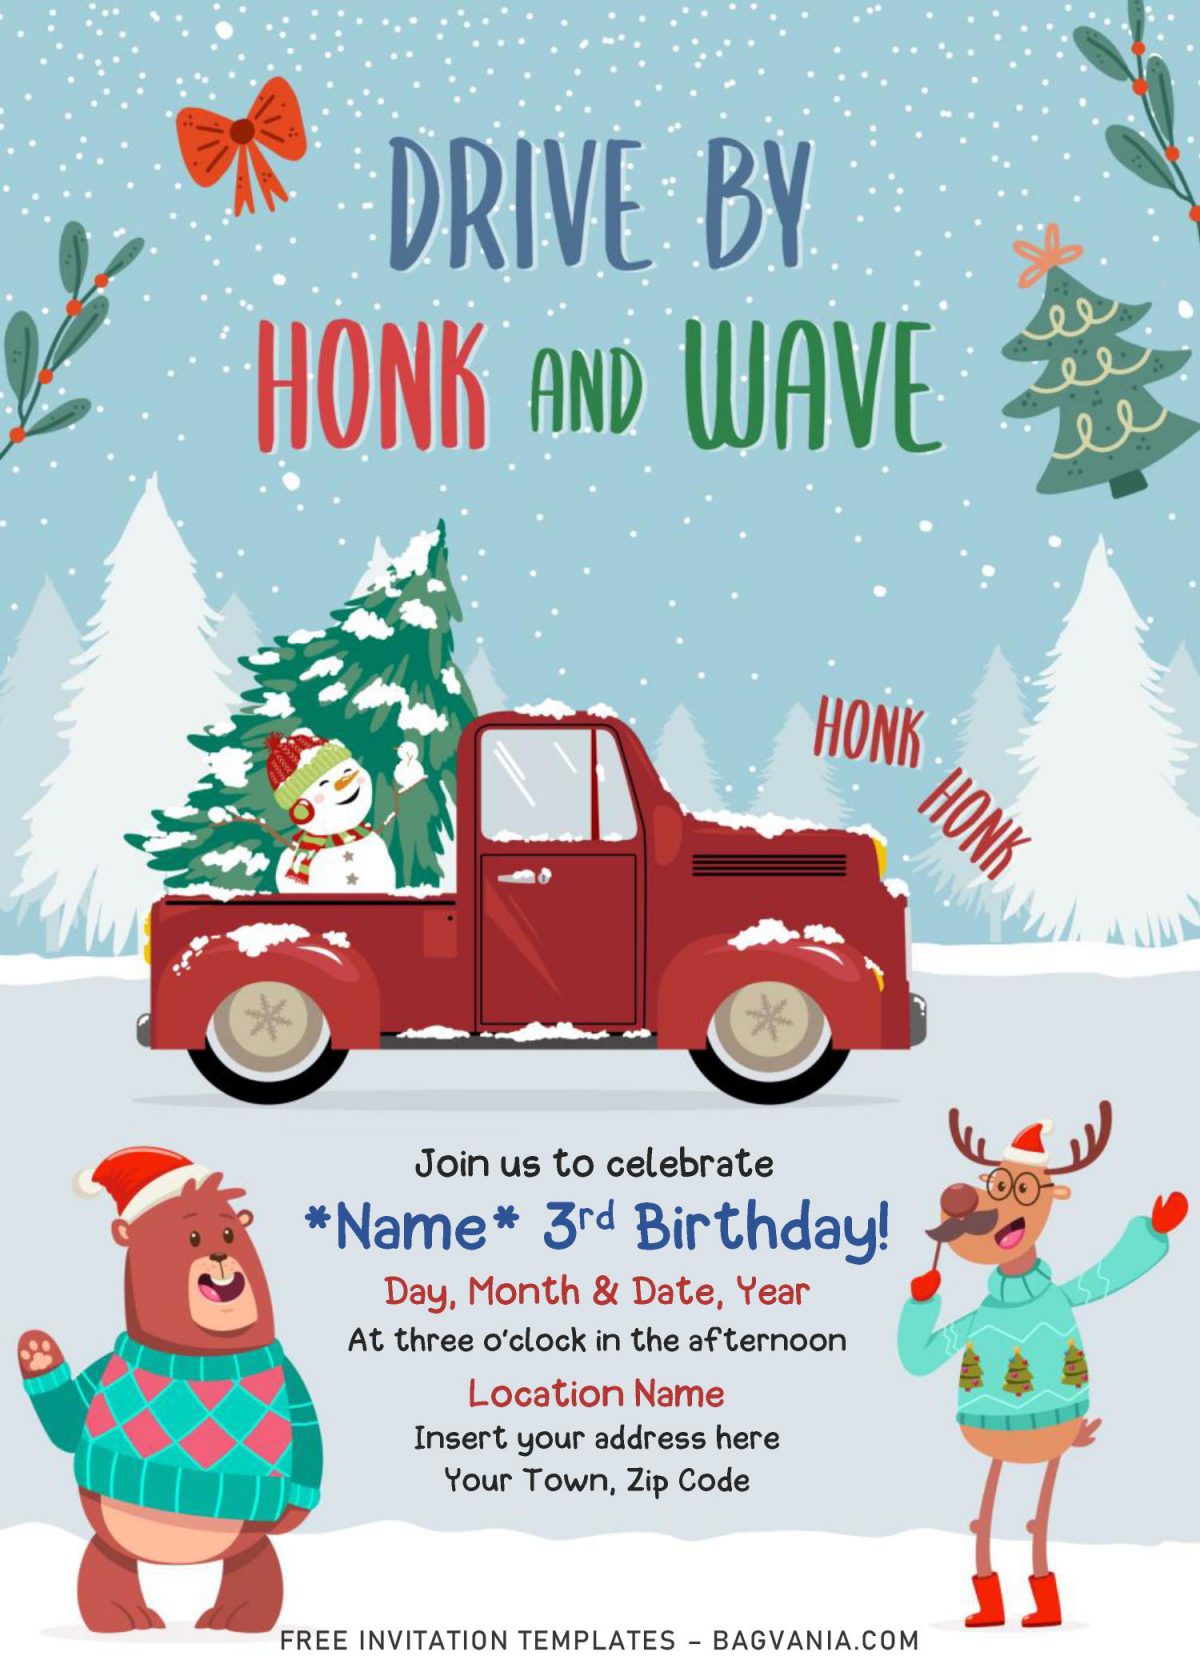 Free Winter Red Truck Drive By Birthday Party Invitation Templates For Word and has red vintage truck with Christmas tree on the truck